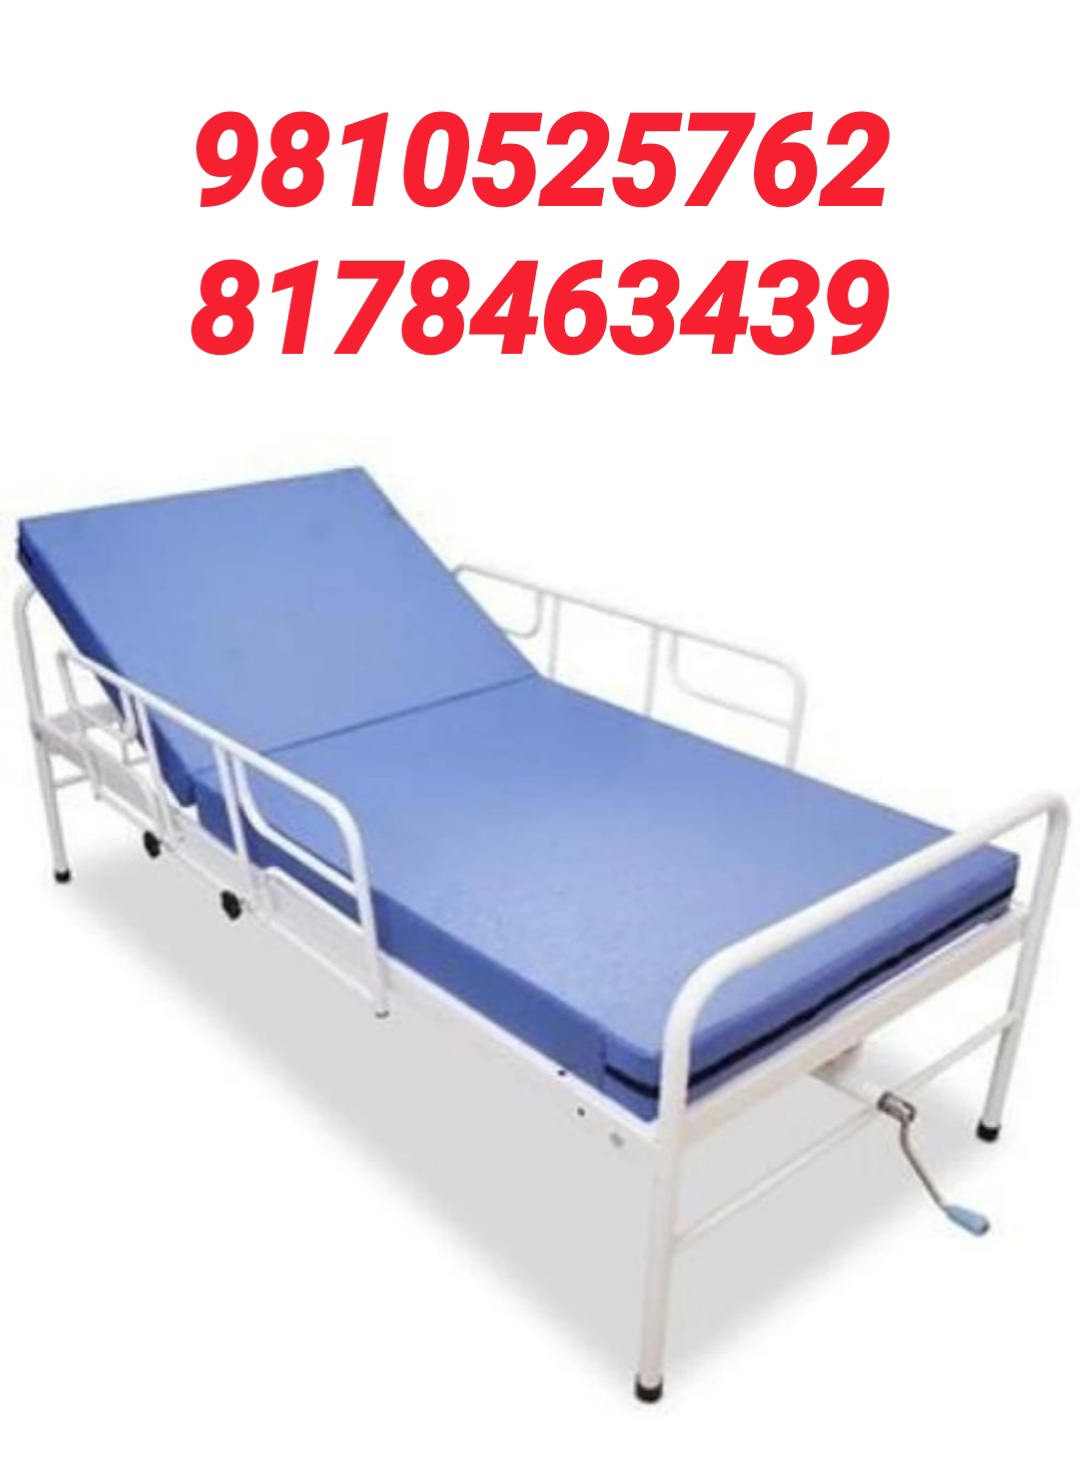 9810525762 Semi Fowler Patient Bed for Rent 8178463439